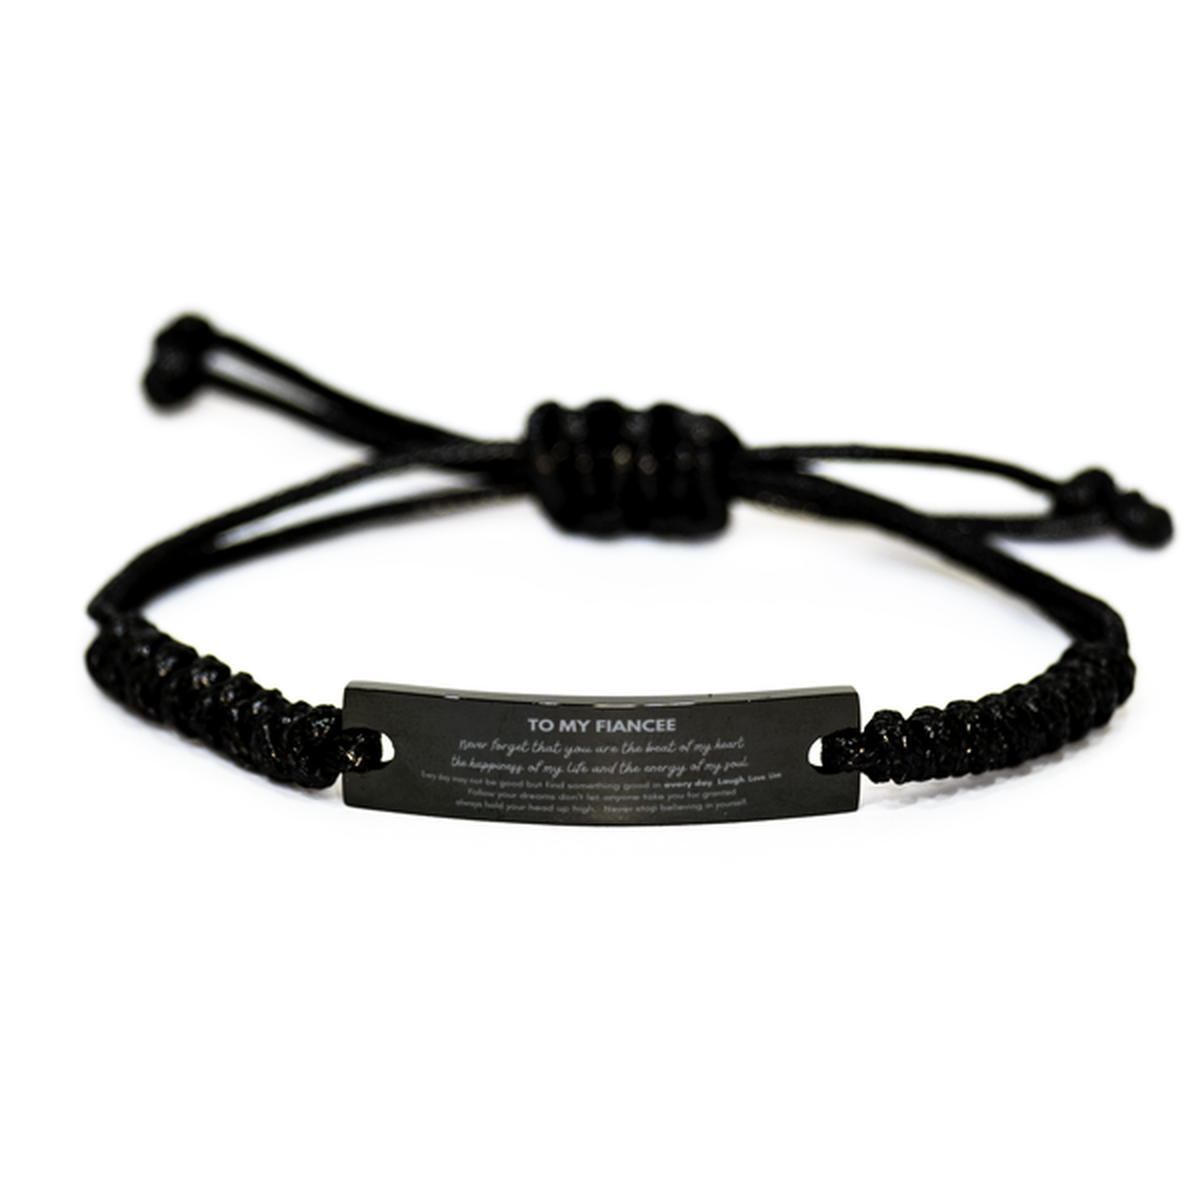 To My Fiancee Bracelet Gifts, Christmas Fiancee Black Rope Bracelet Present, Birthday Unique Motivational For Fiancee, To My Fiancee Never forget that you are the beat of my heart the happiness of my life and the energy of my soul